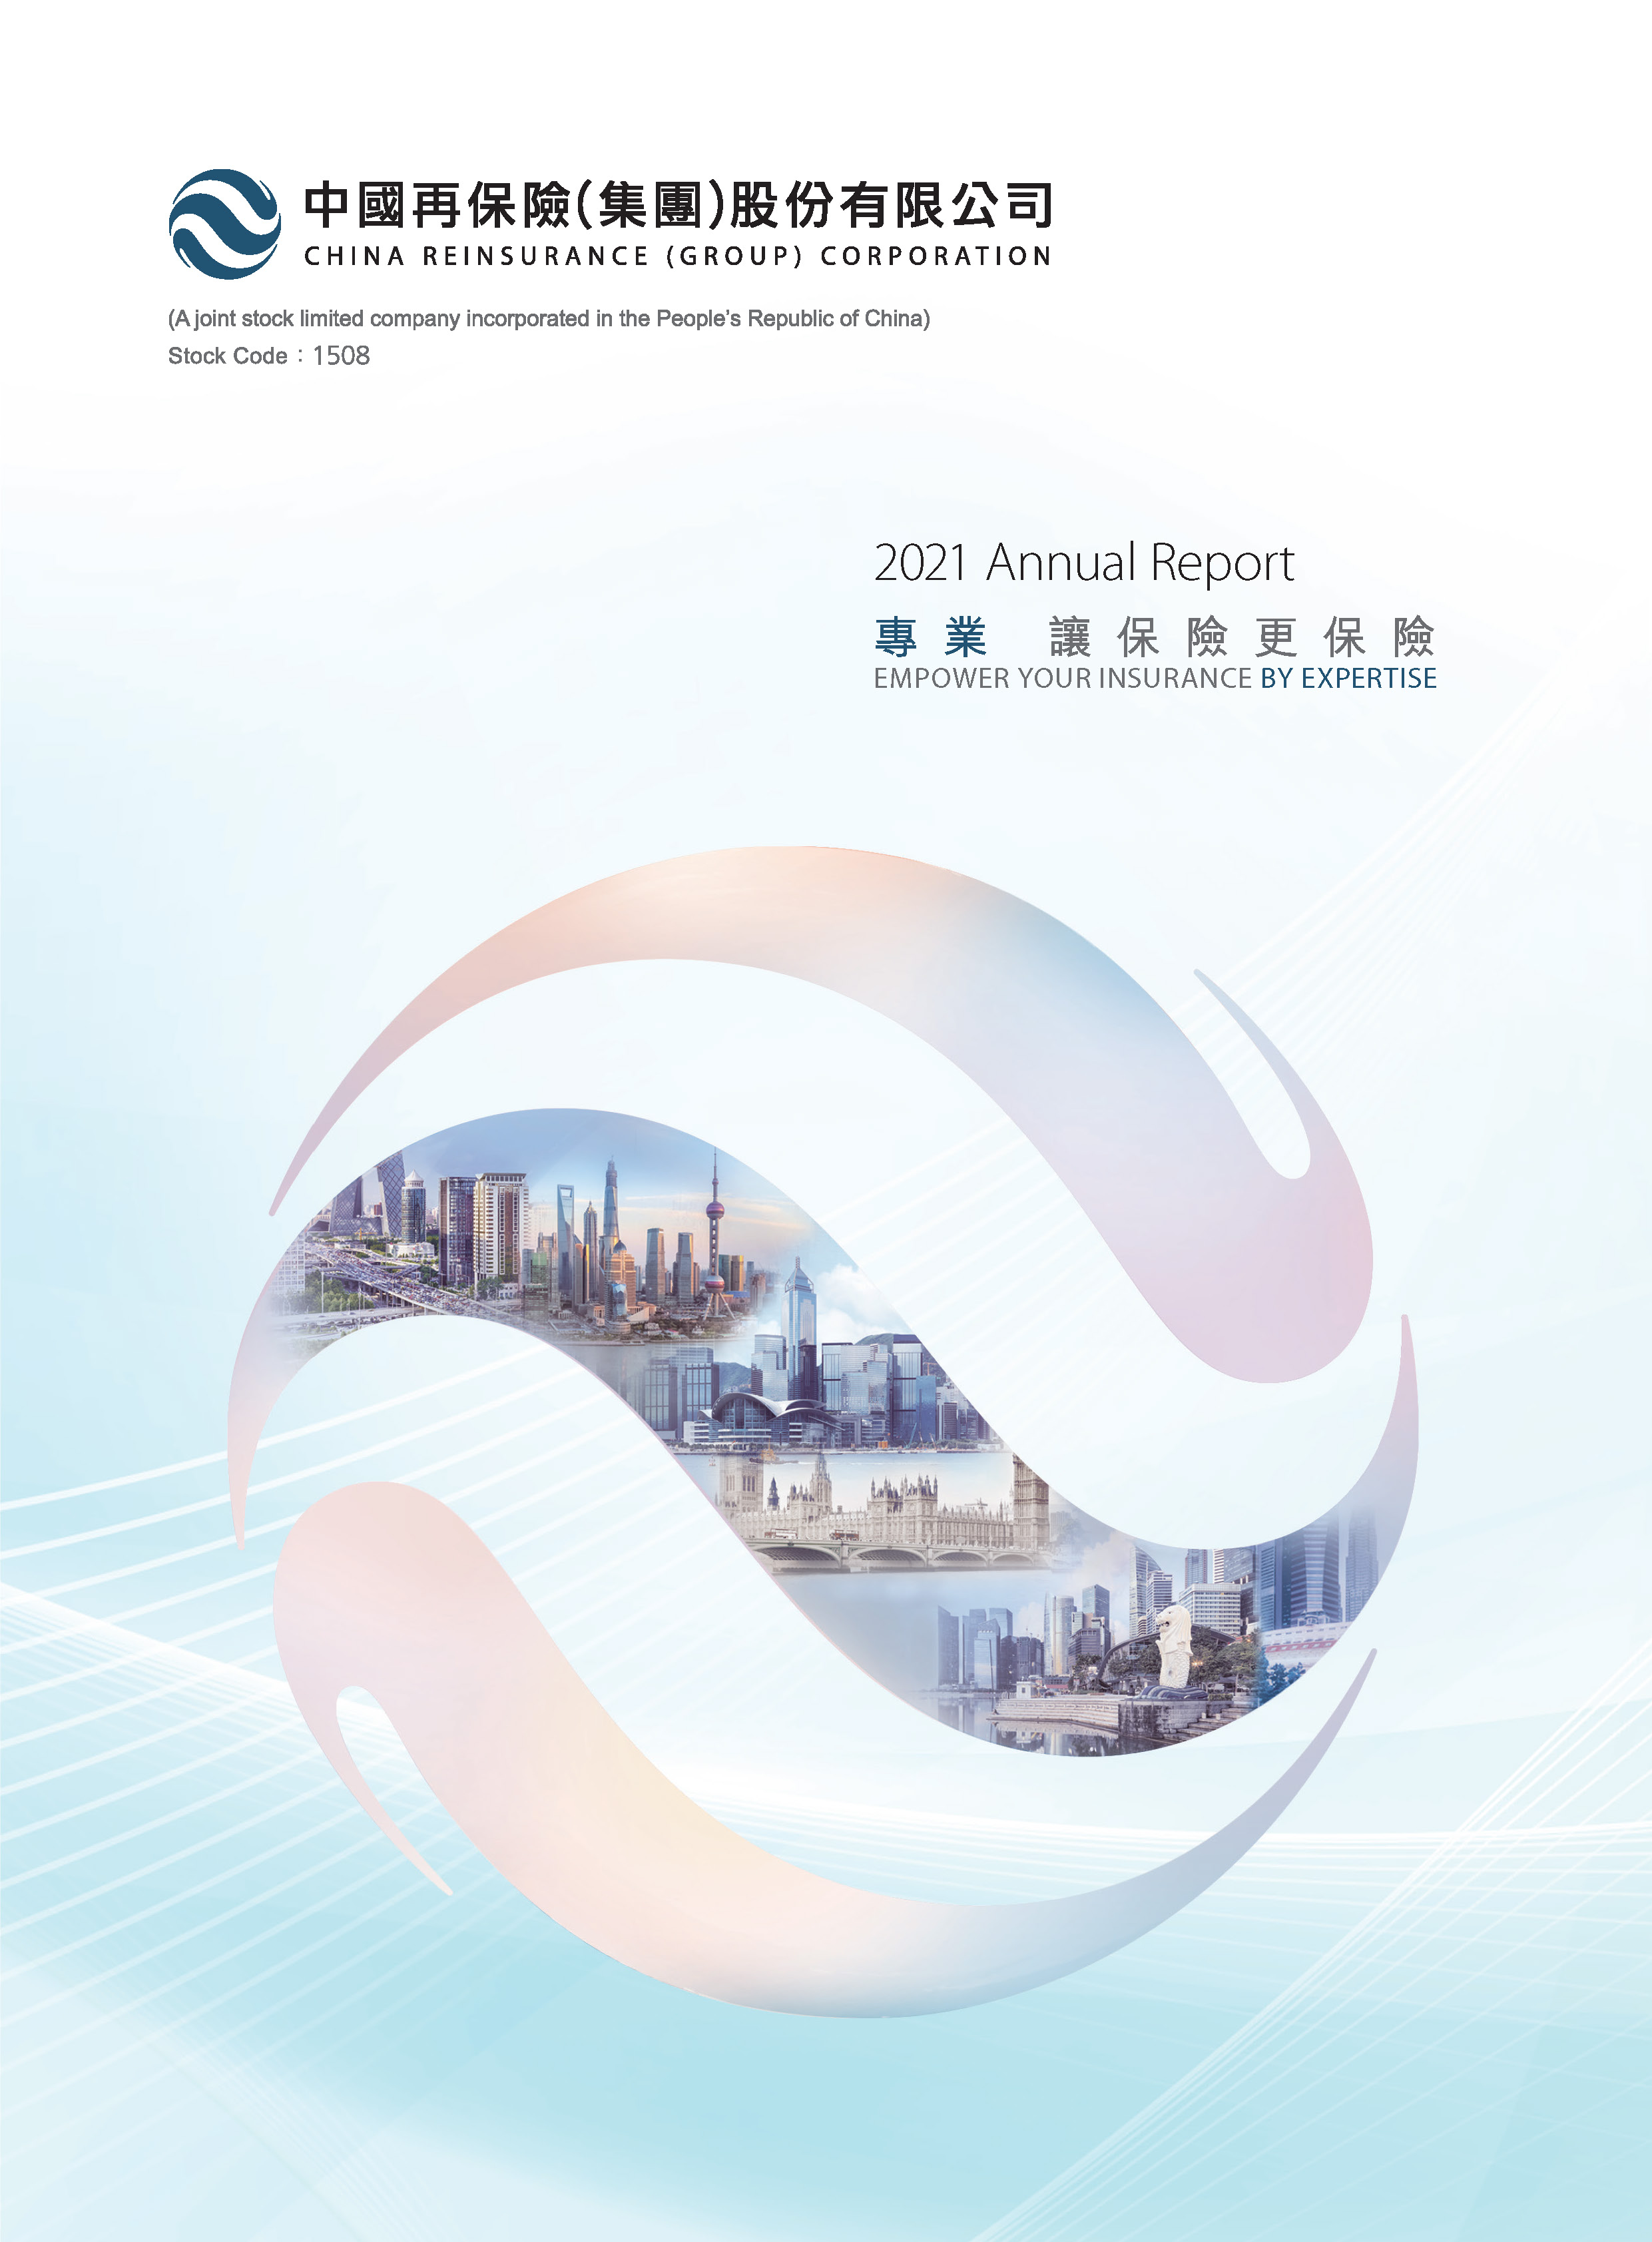 China Reinsurance (Group) Corporation 2021 Annual Report